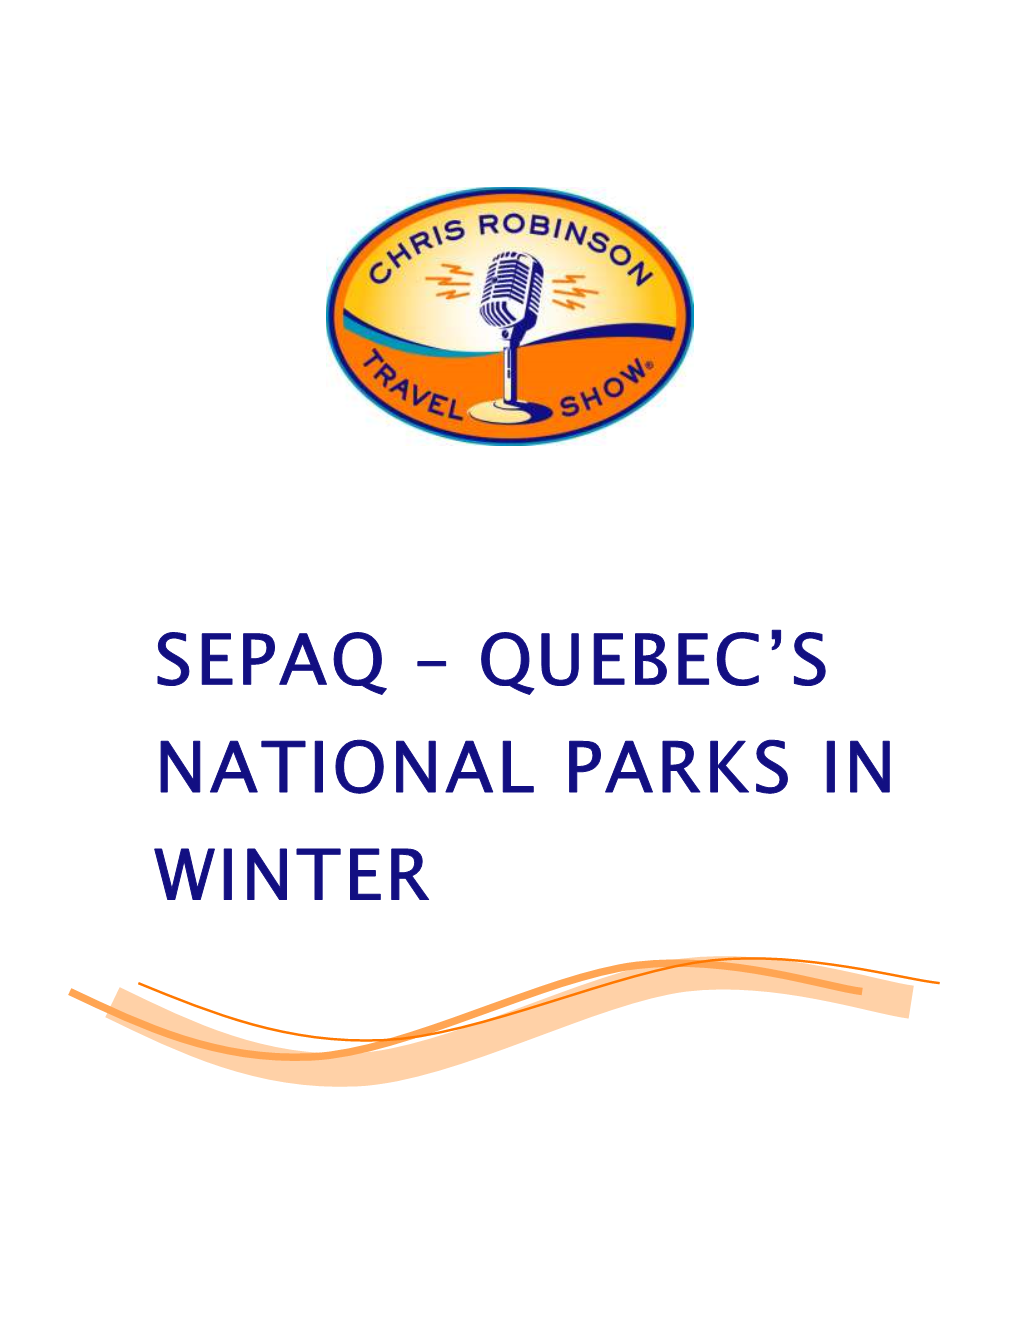 Sepaq – Quebec's National Parks in Winter